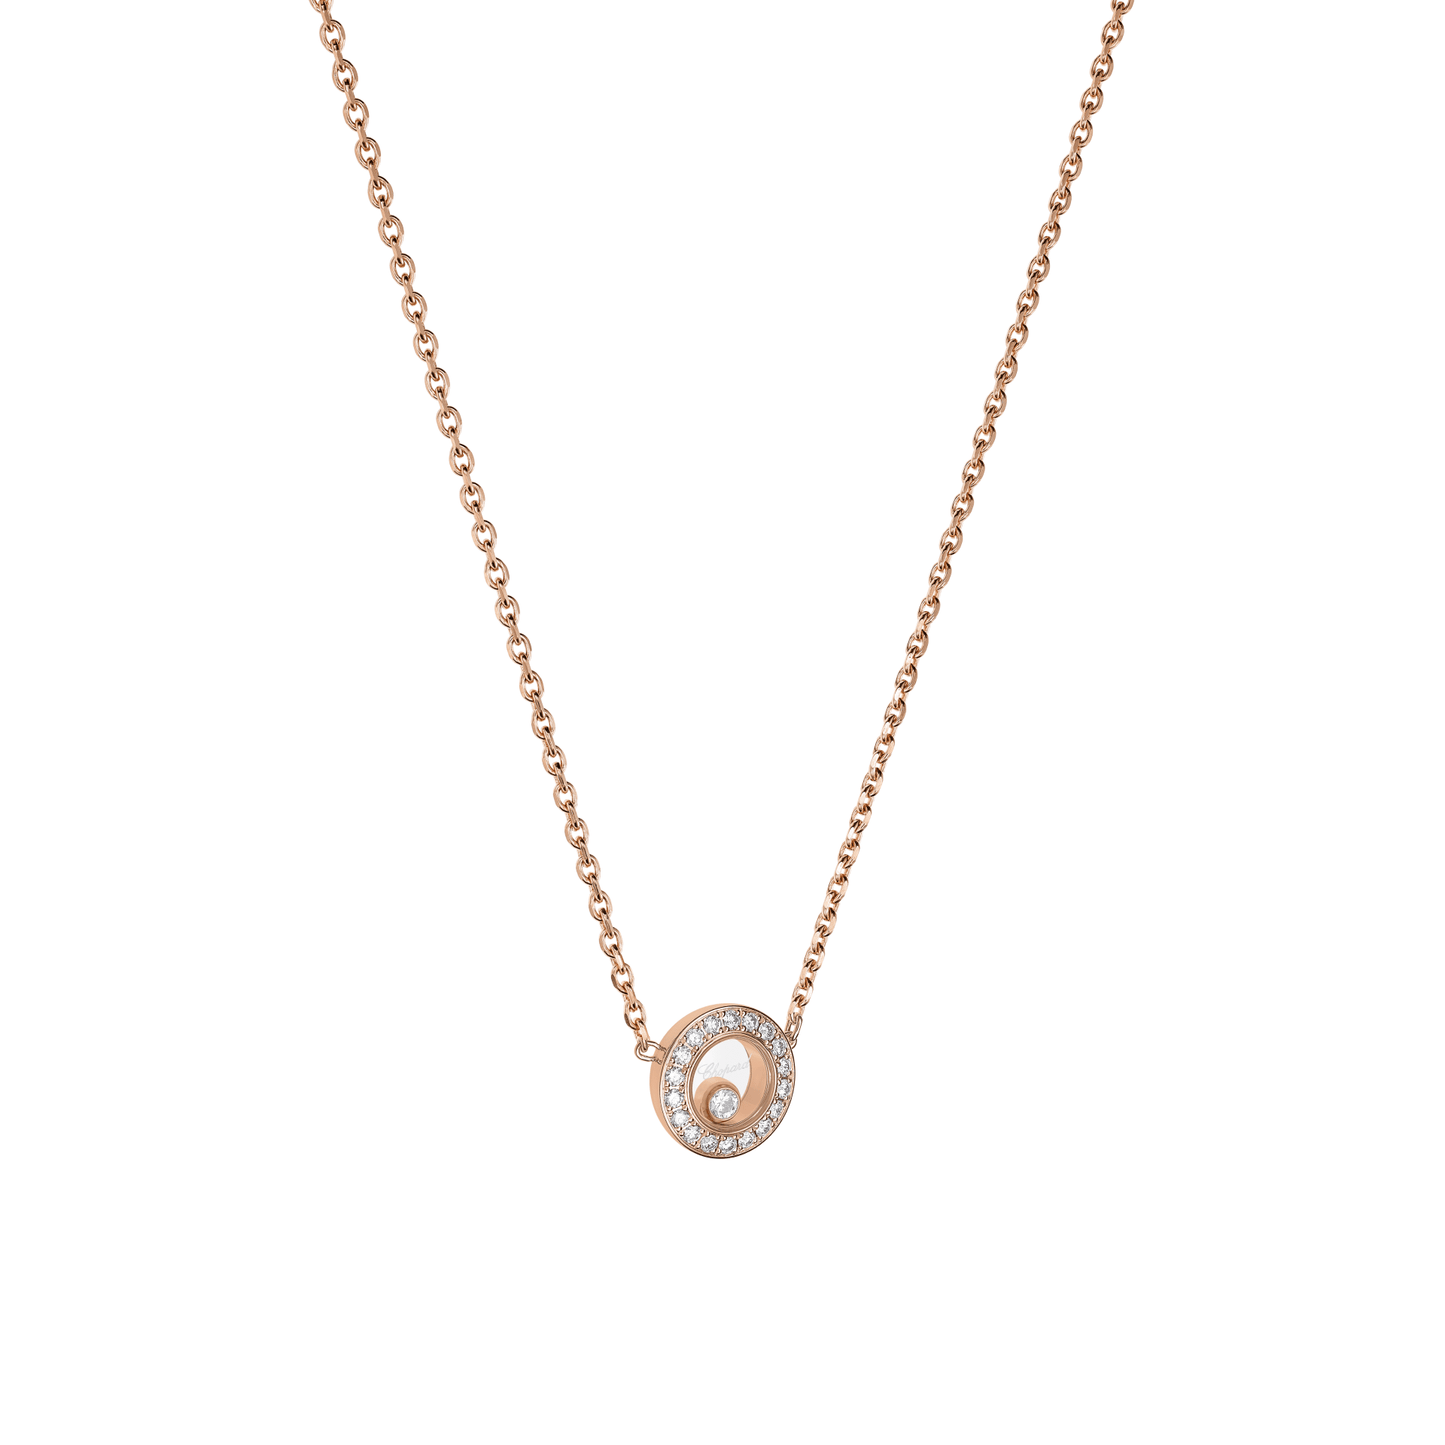 HAPPY DIAMONDS ICONS NECKLACE, ETHICAL ROSE GOLD, DIAMONDS 81A017-5201